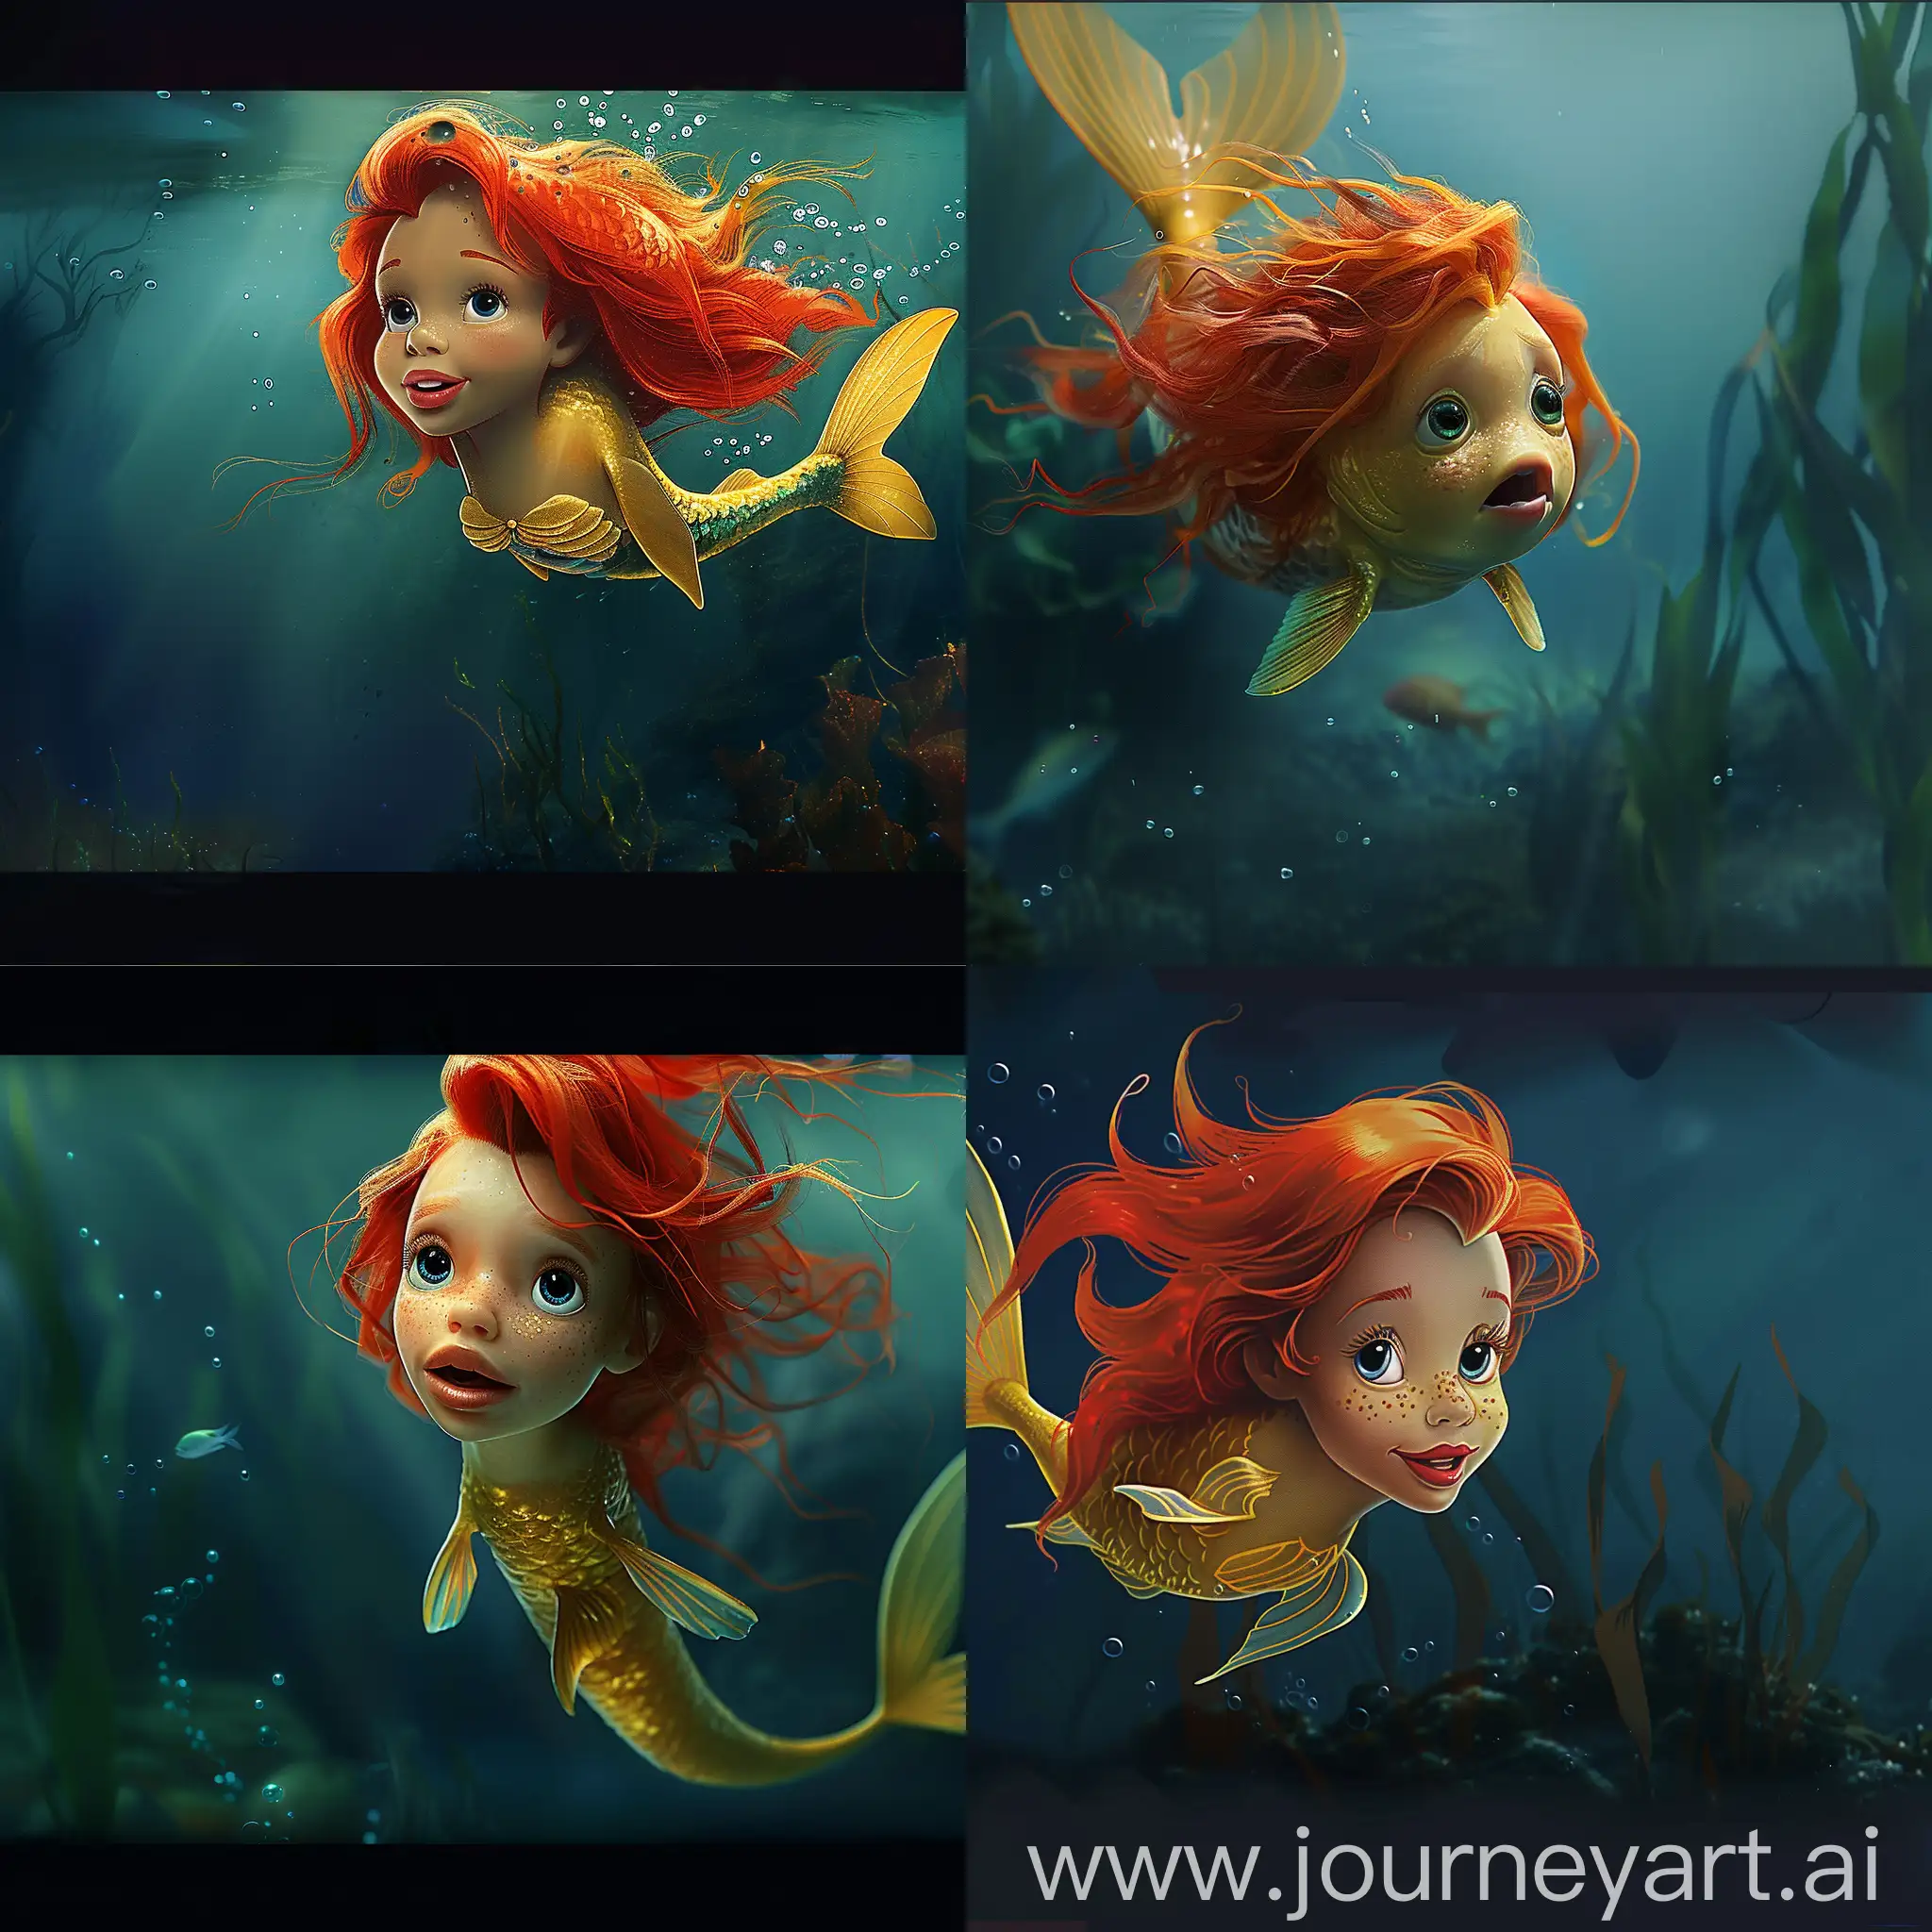 Vibrant-Yellow-Fish-Inspired-by-The-Little-Mermaid